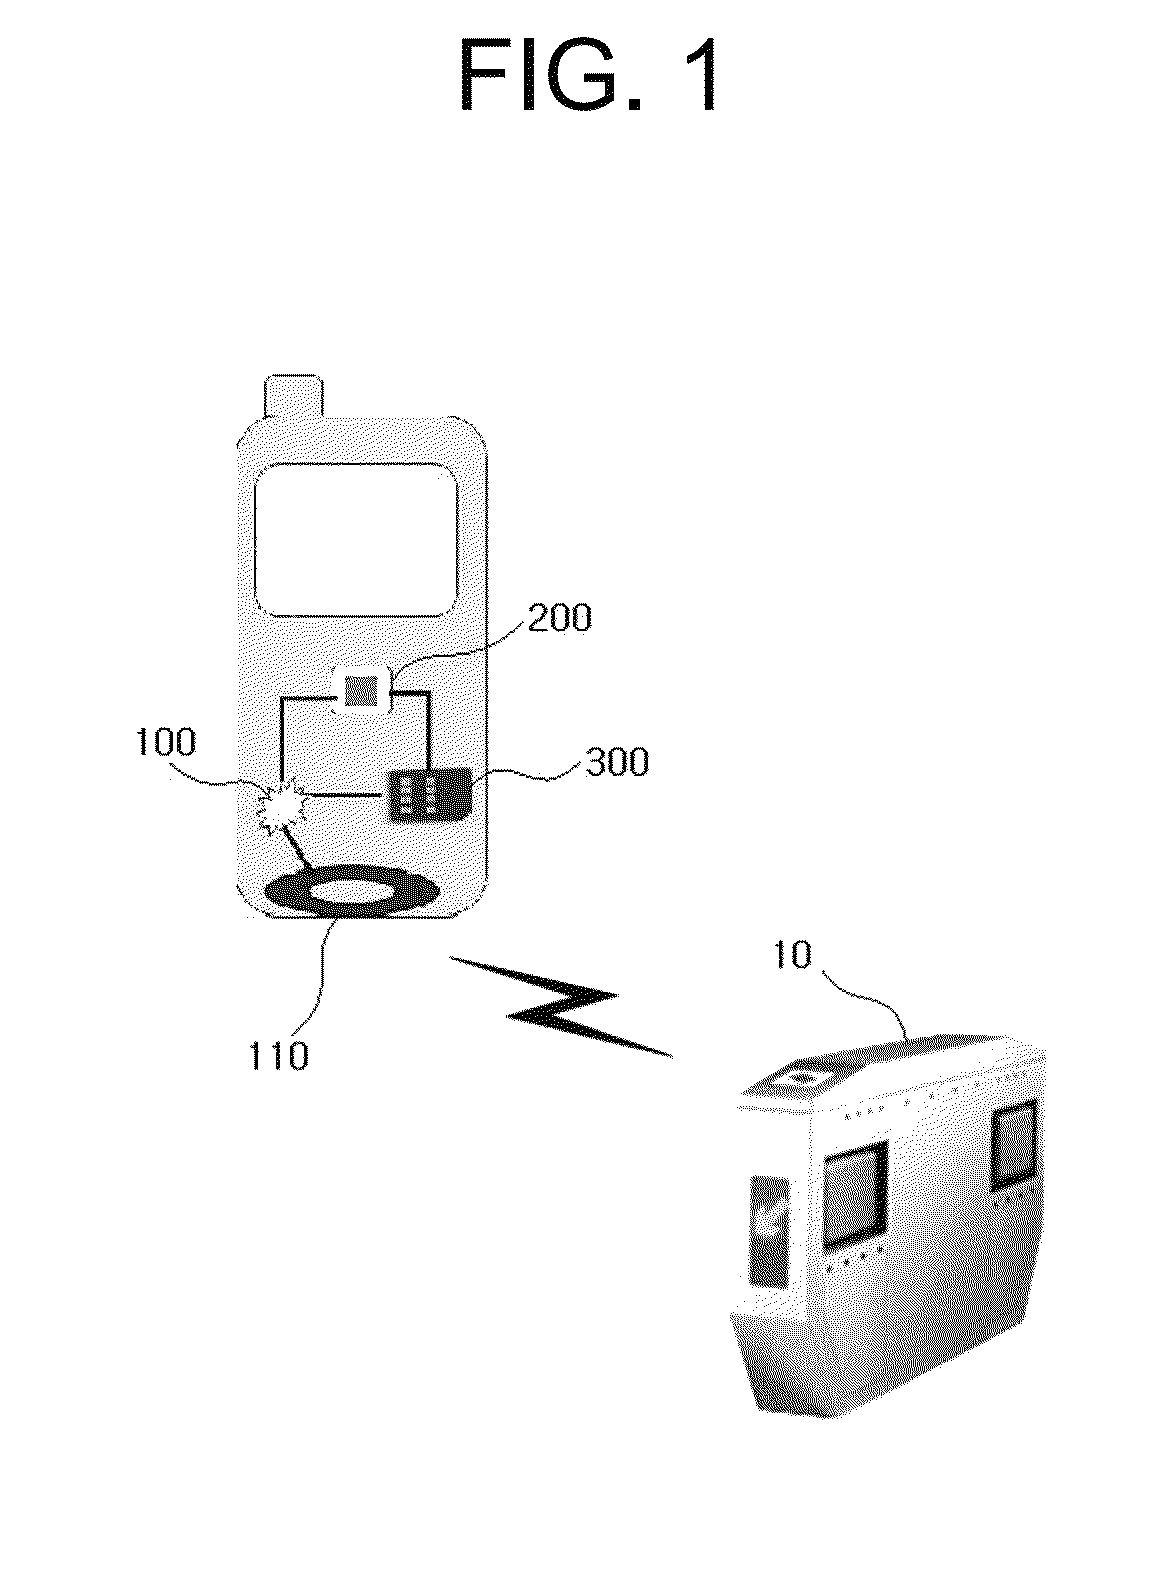 Apparatus and method for controlling functions of a mobile phone via NFC communication with an external RF reader